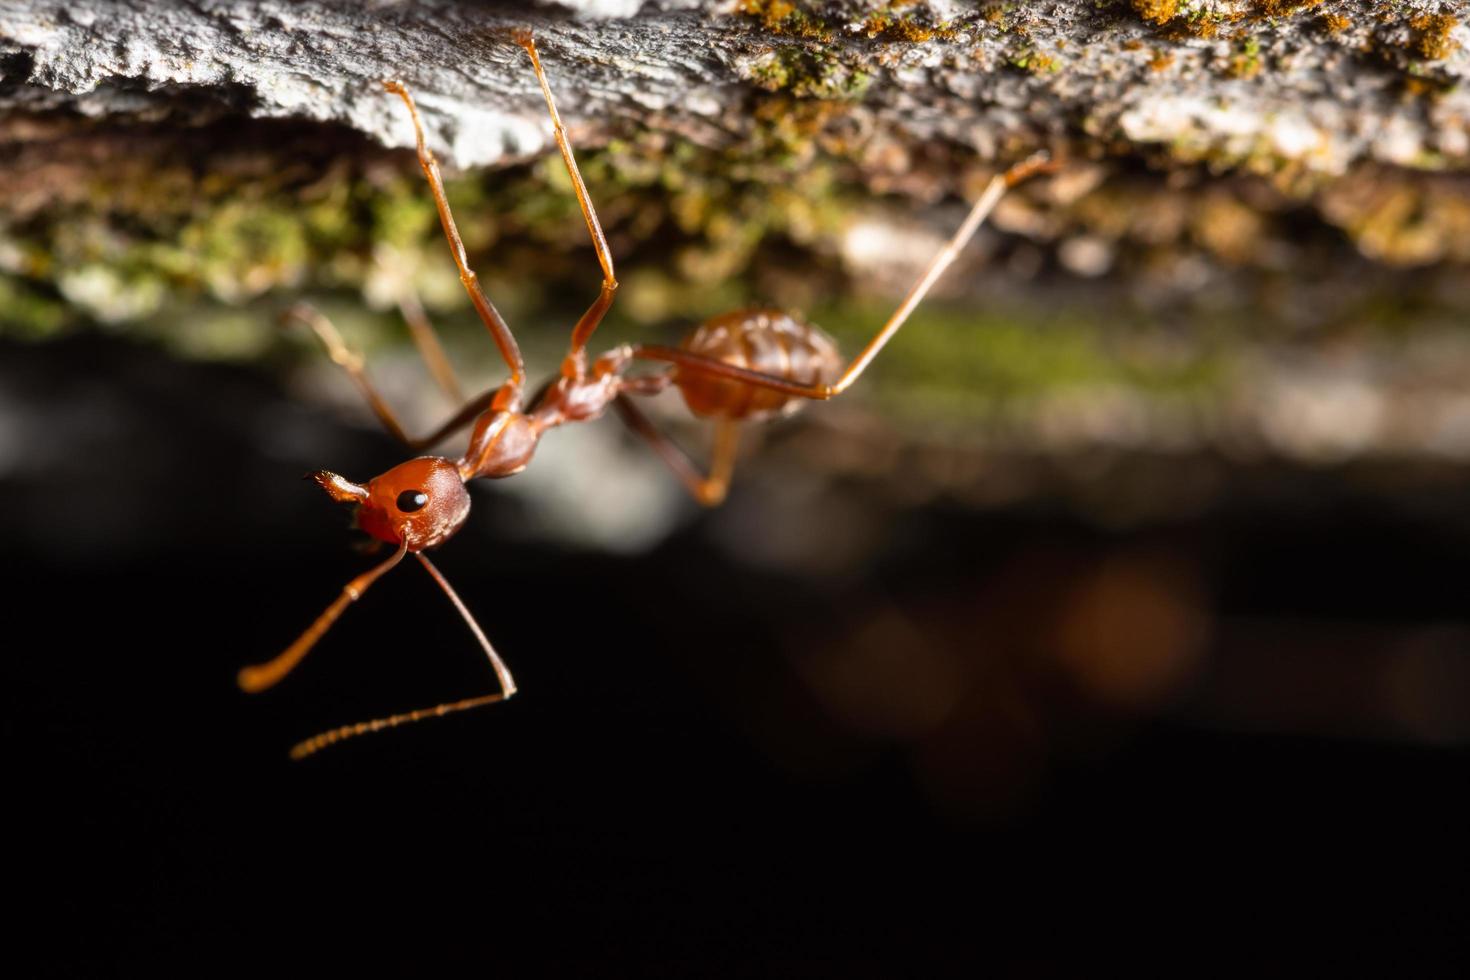 Ant on a branch photo